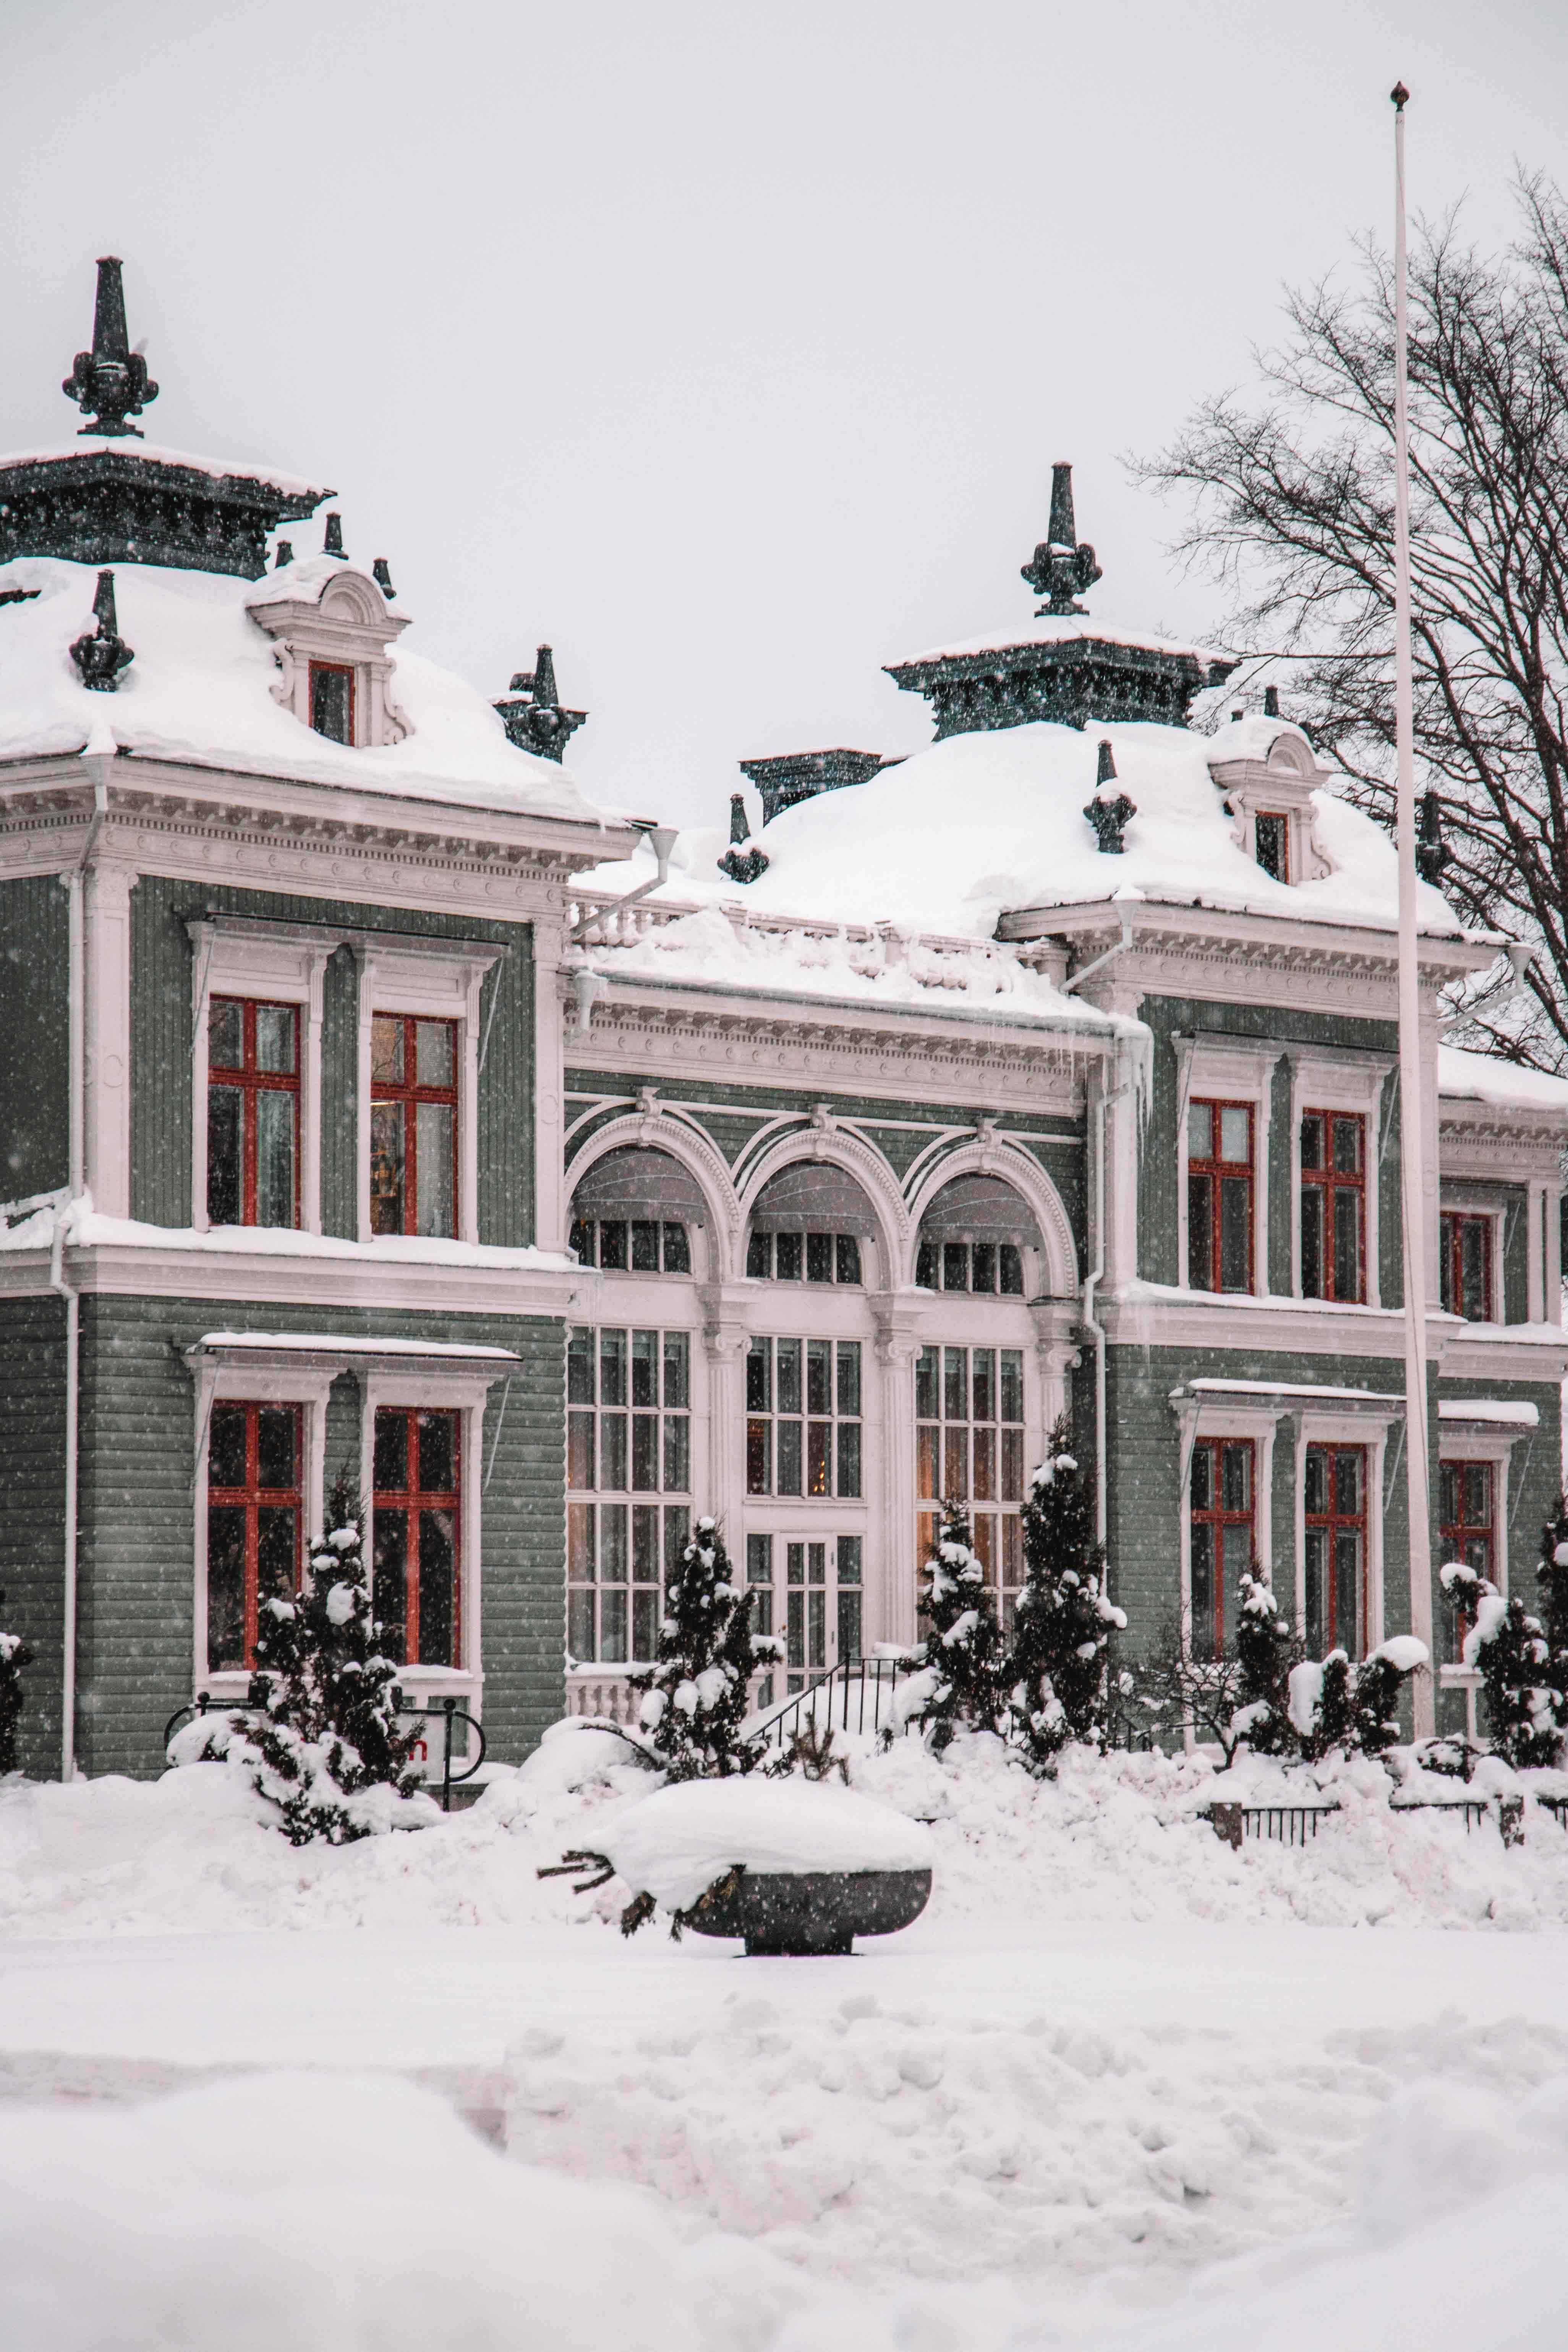 Umeå in the winter city photographs